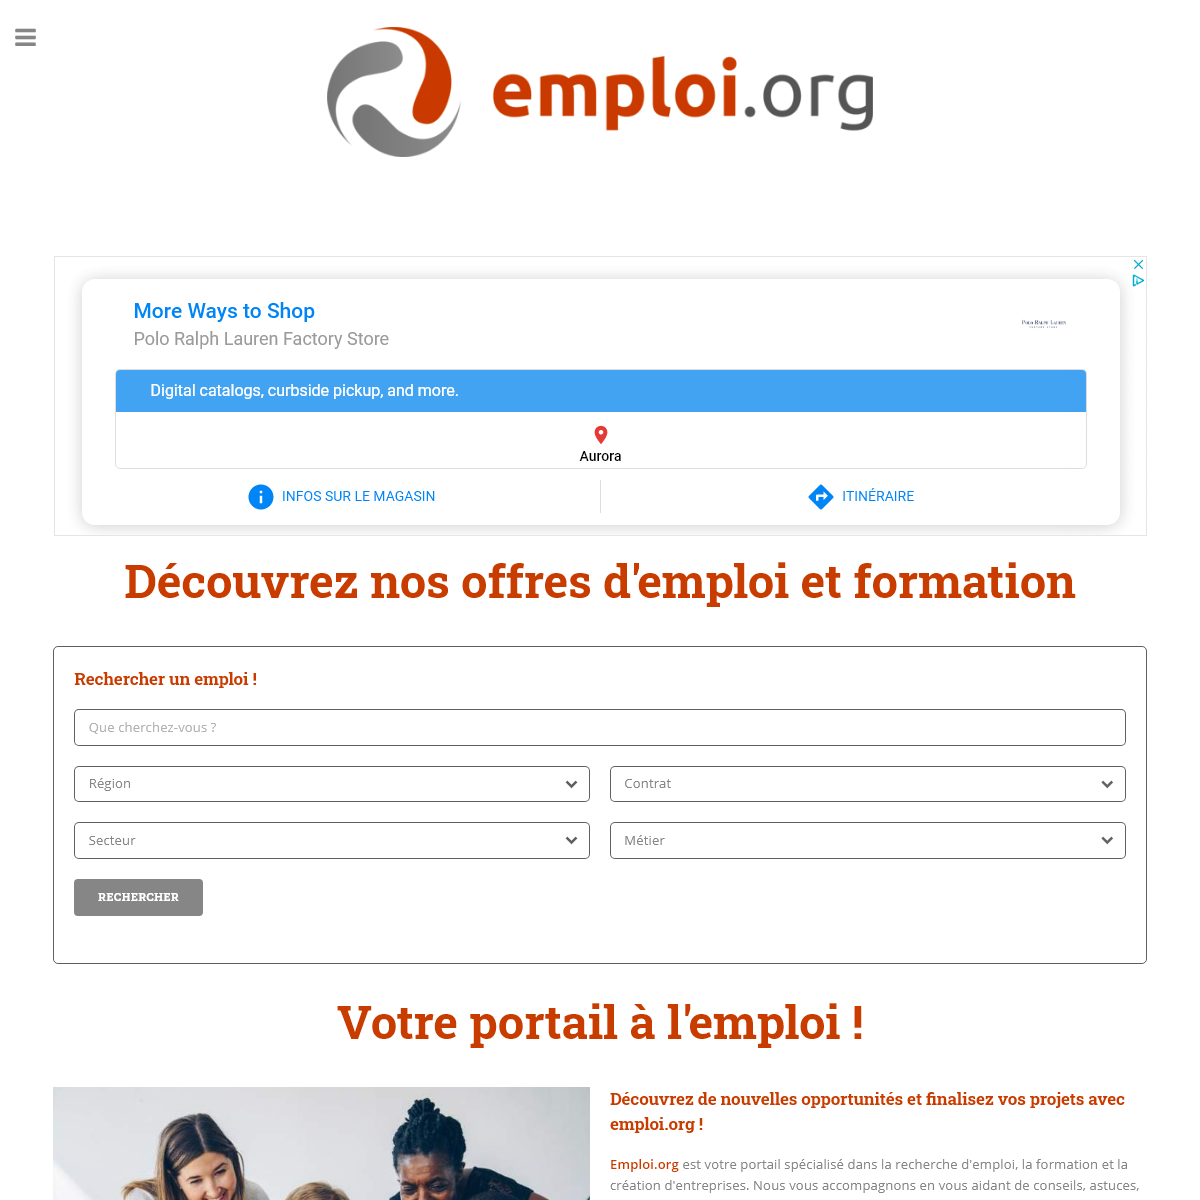 A complete backup of emploi.org